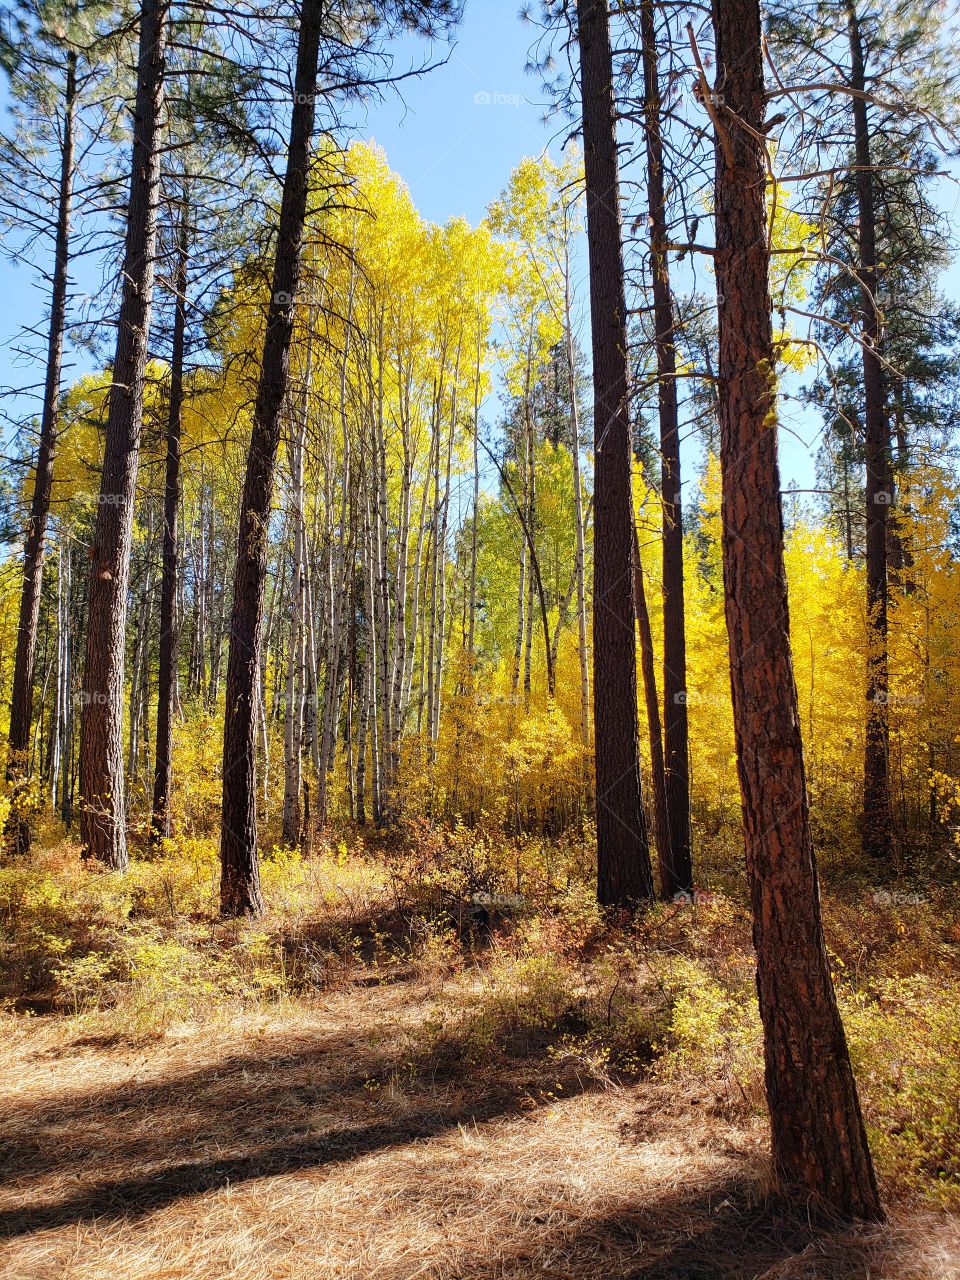 Magnificent ponderosa pine trees grow with aspen trees with leaves of golden yellow fall colors along the banks of Indian Ford Creek in the forests of Central Oregon on a sunny autumn day. 